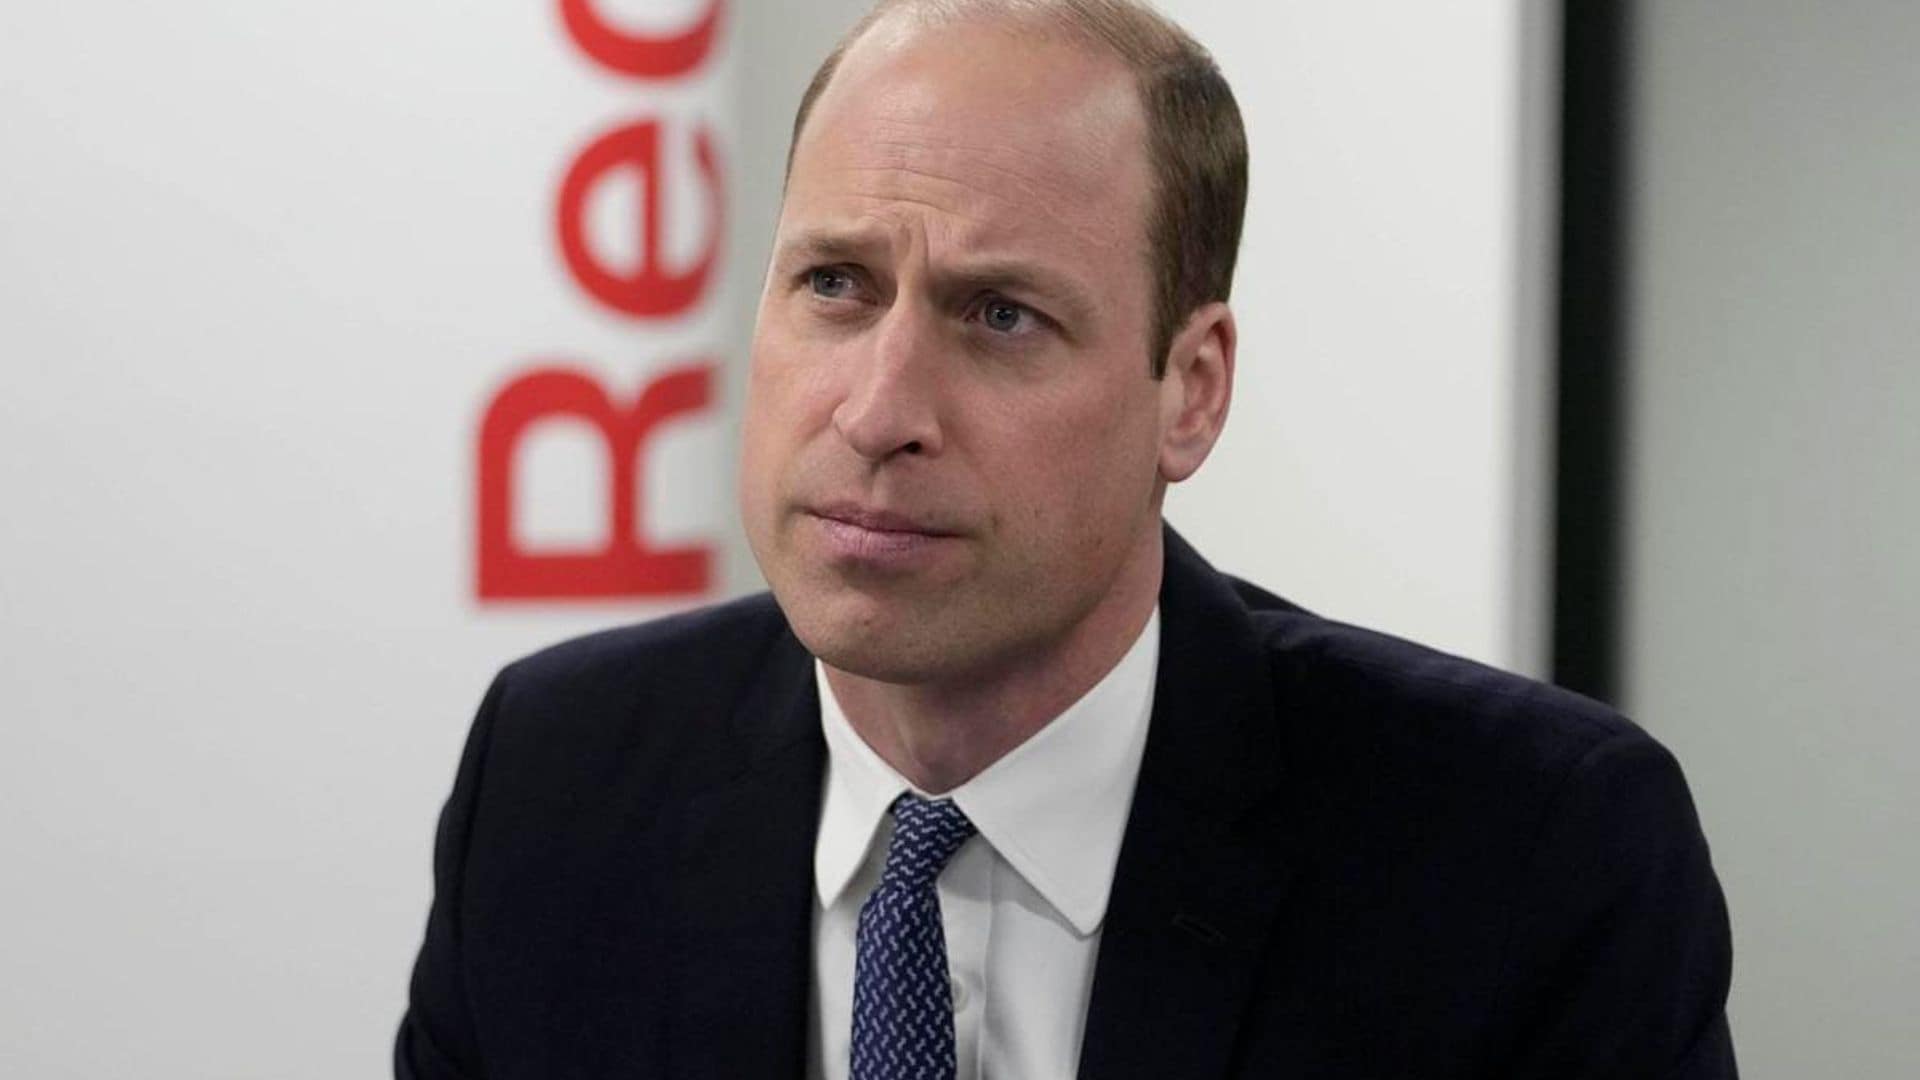 Prince William misses godfather's service due to personal matter